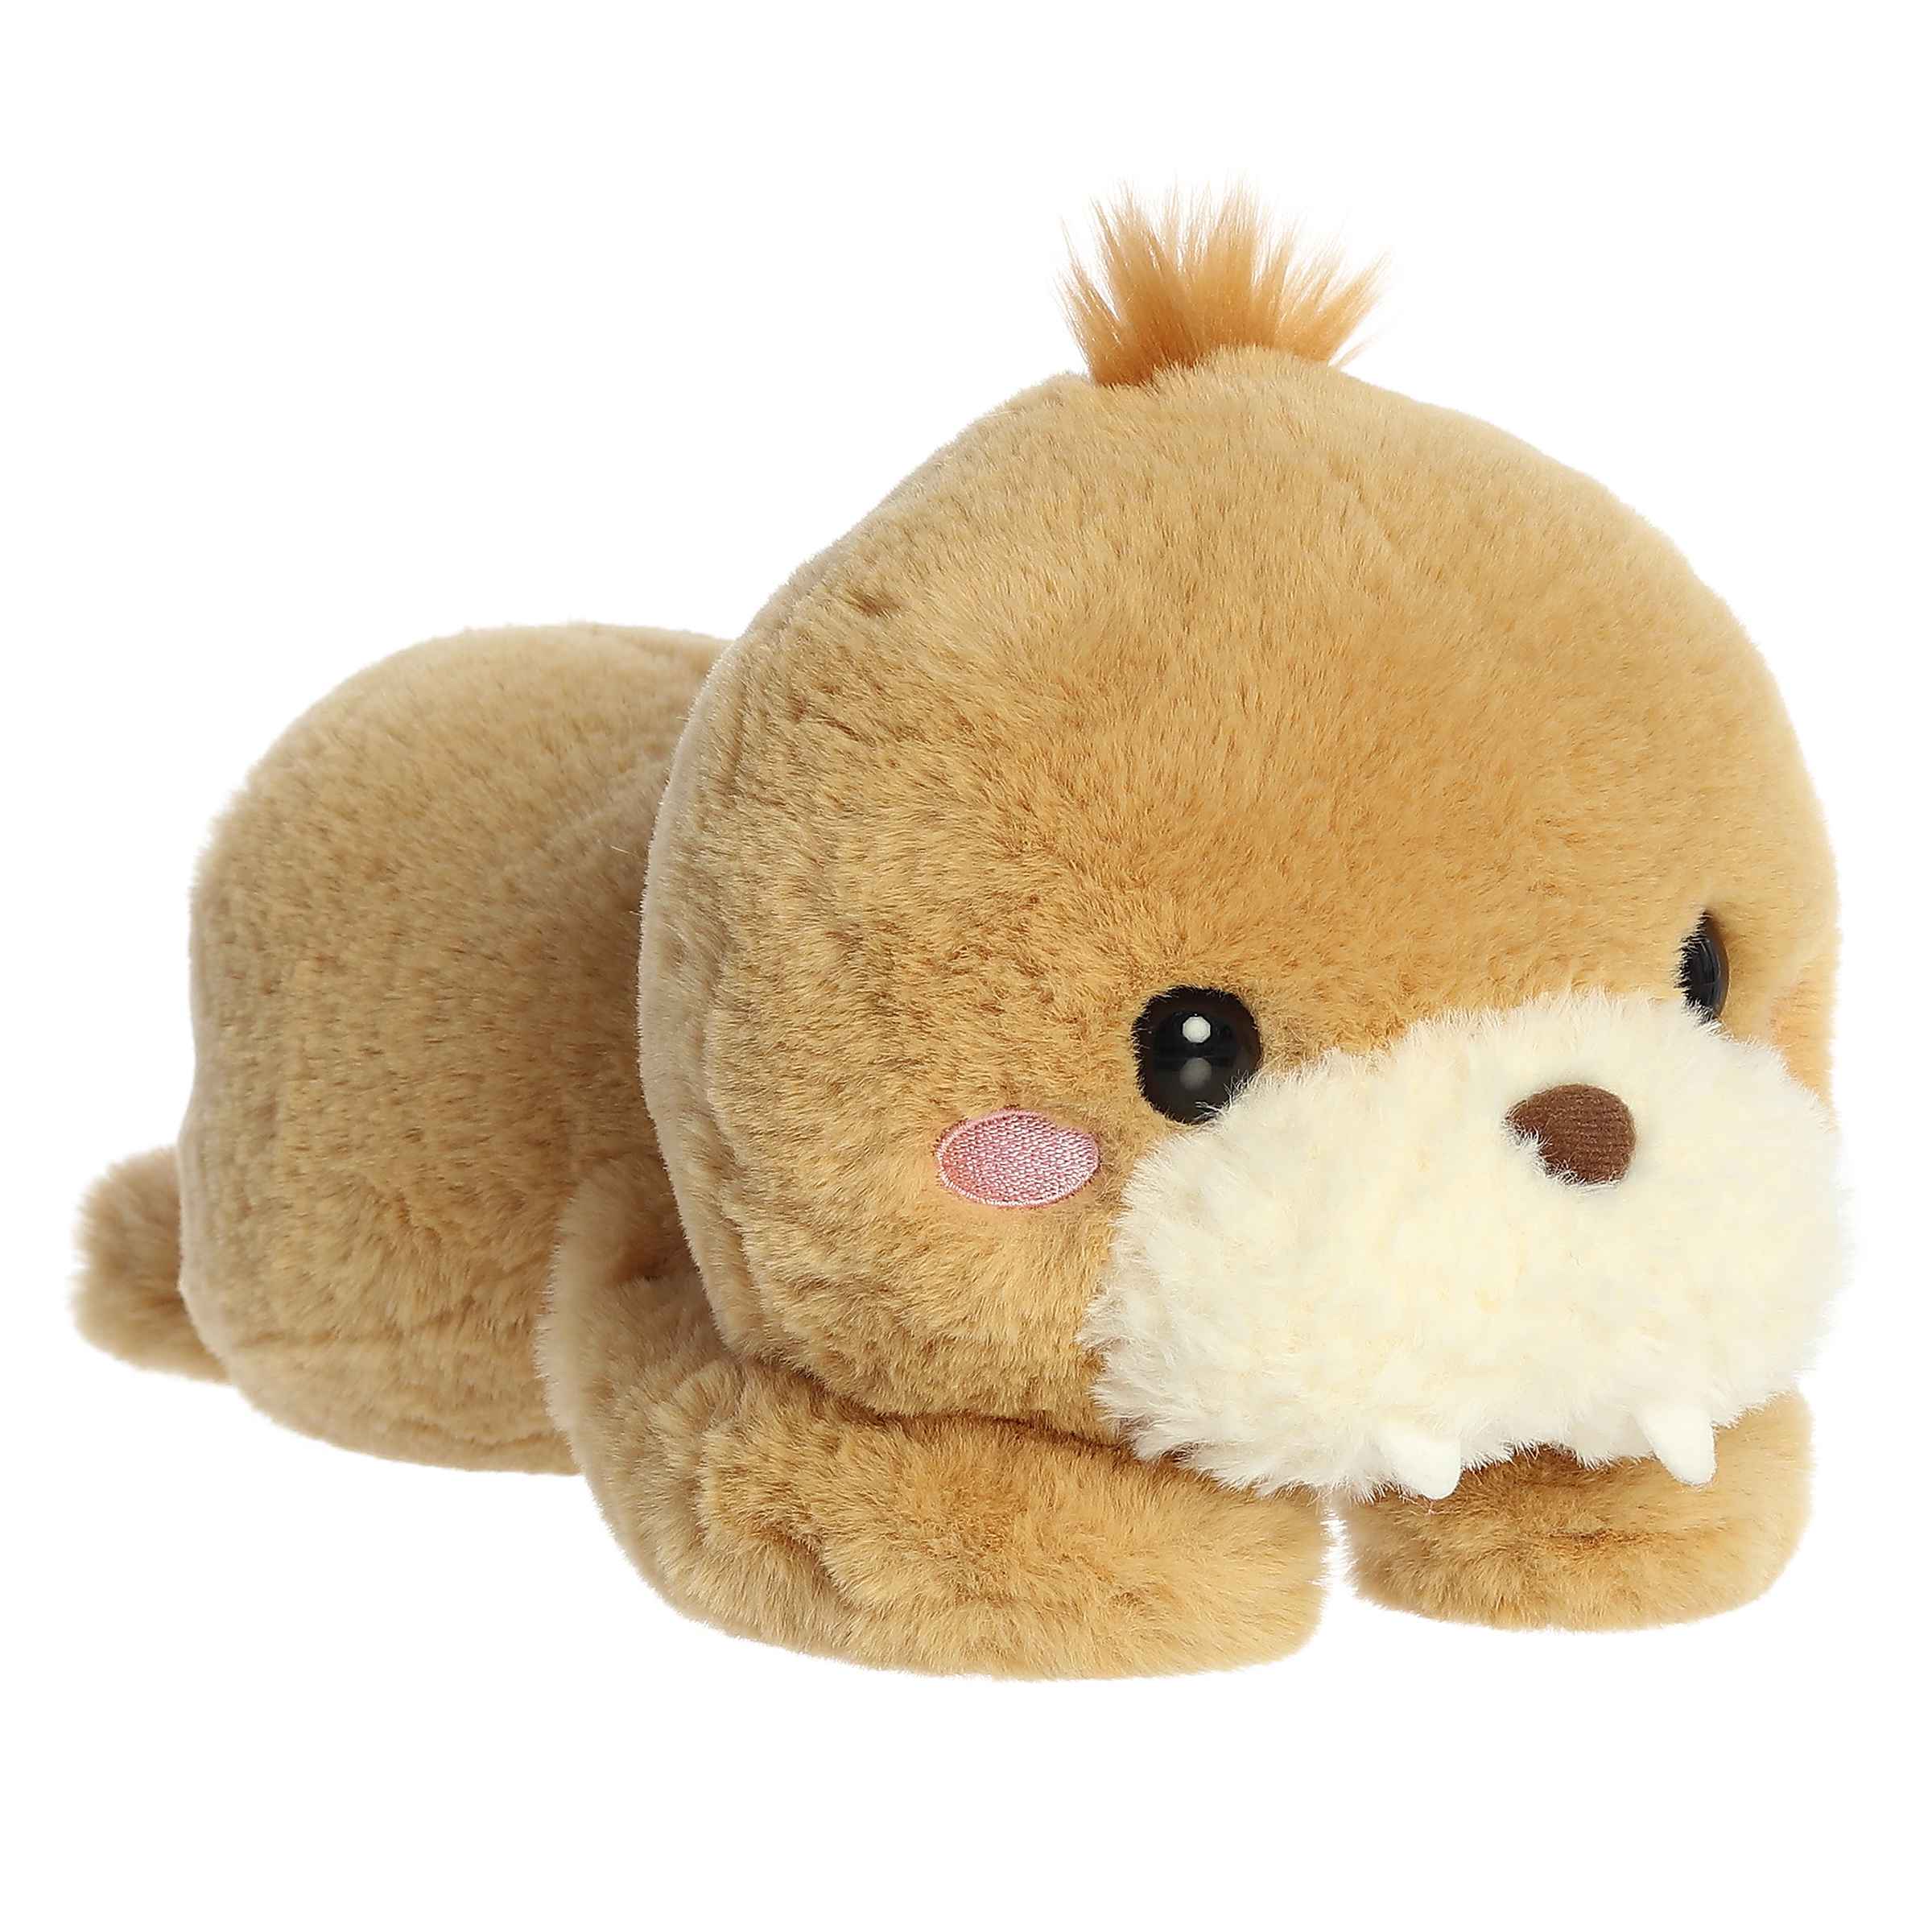 Wully Walrus plush from Too Cute Collection, with soft fur and friendly tusks, snuggly